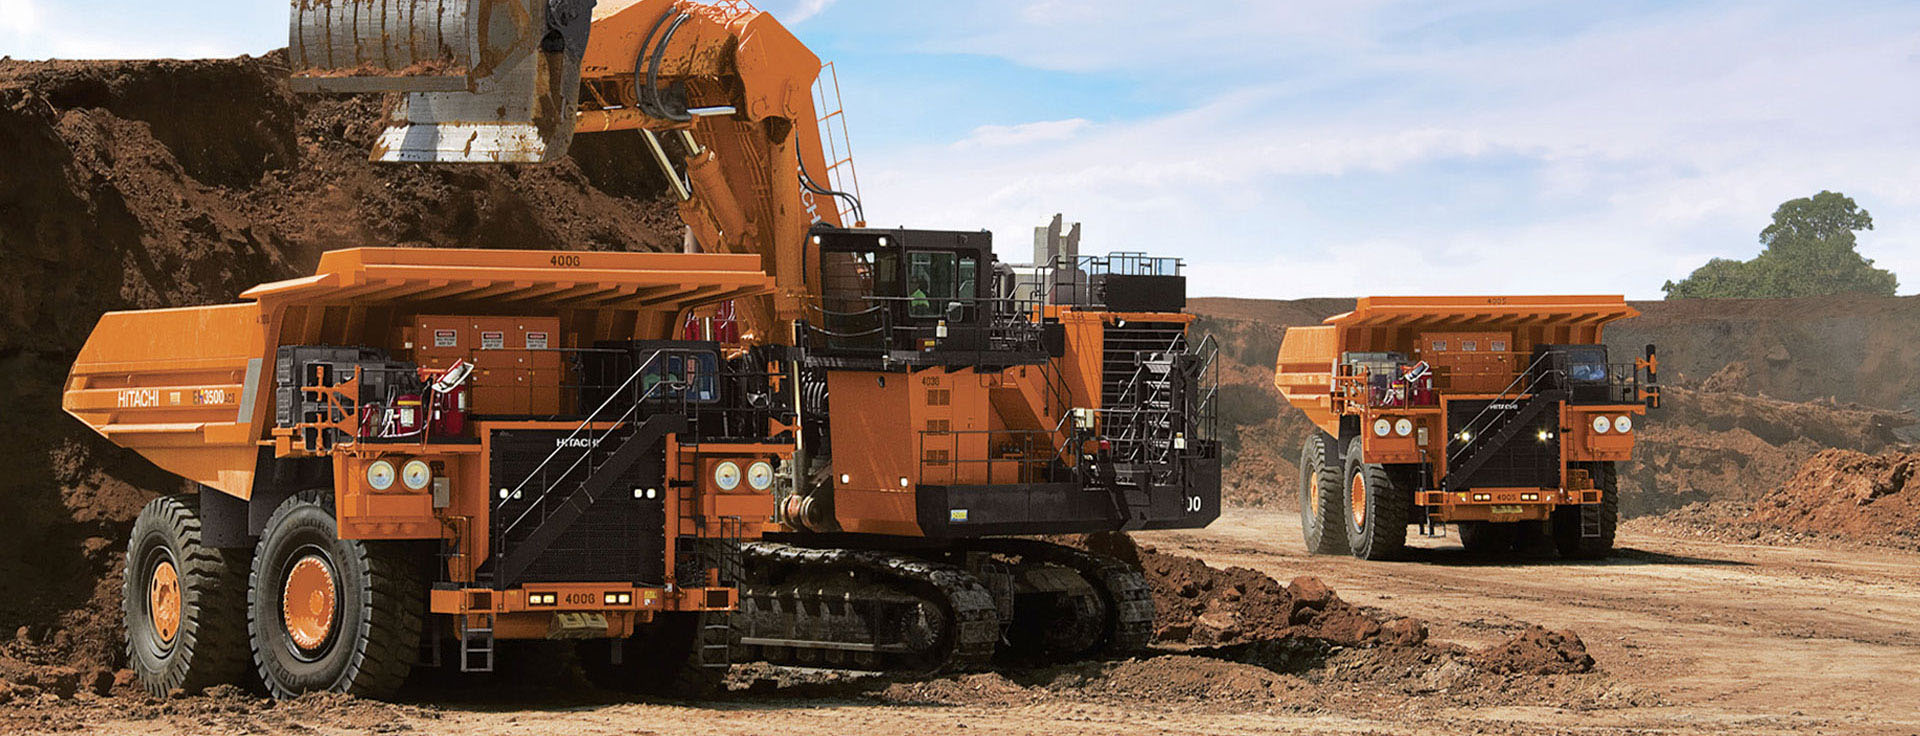 Mining machineries distribution & Product Support business